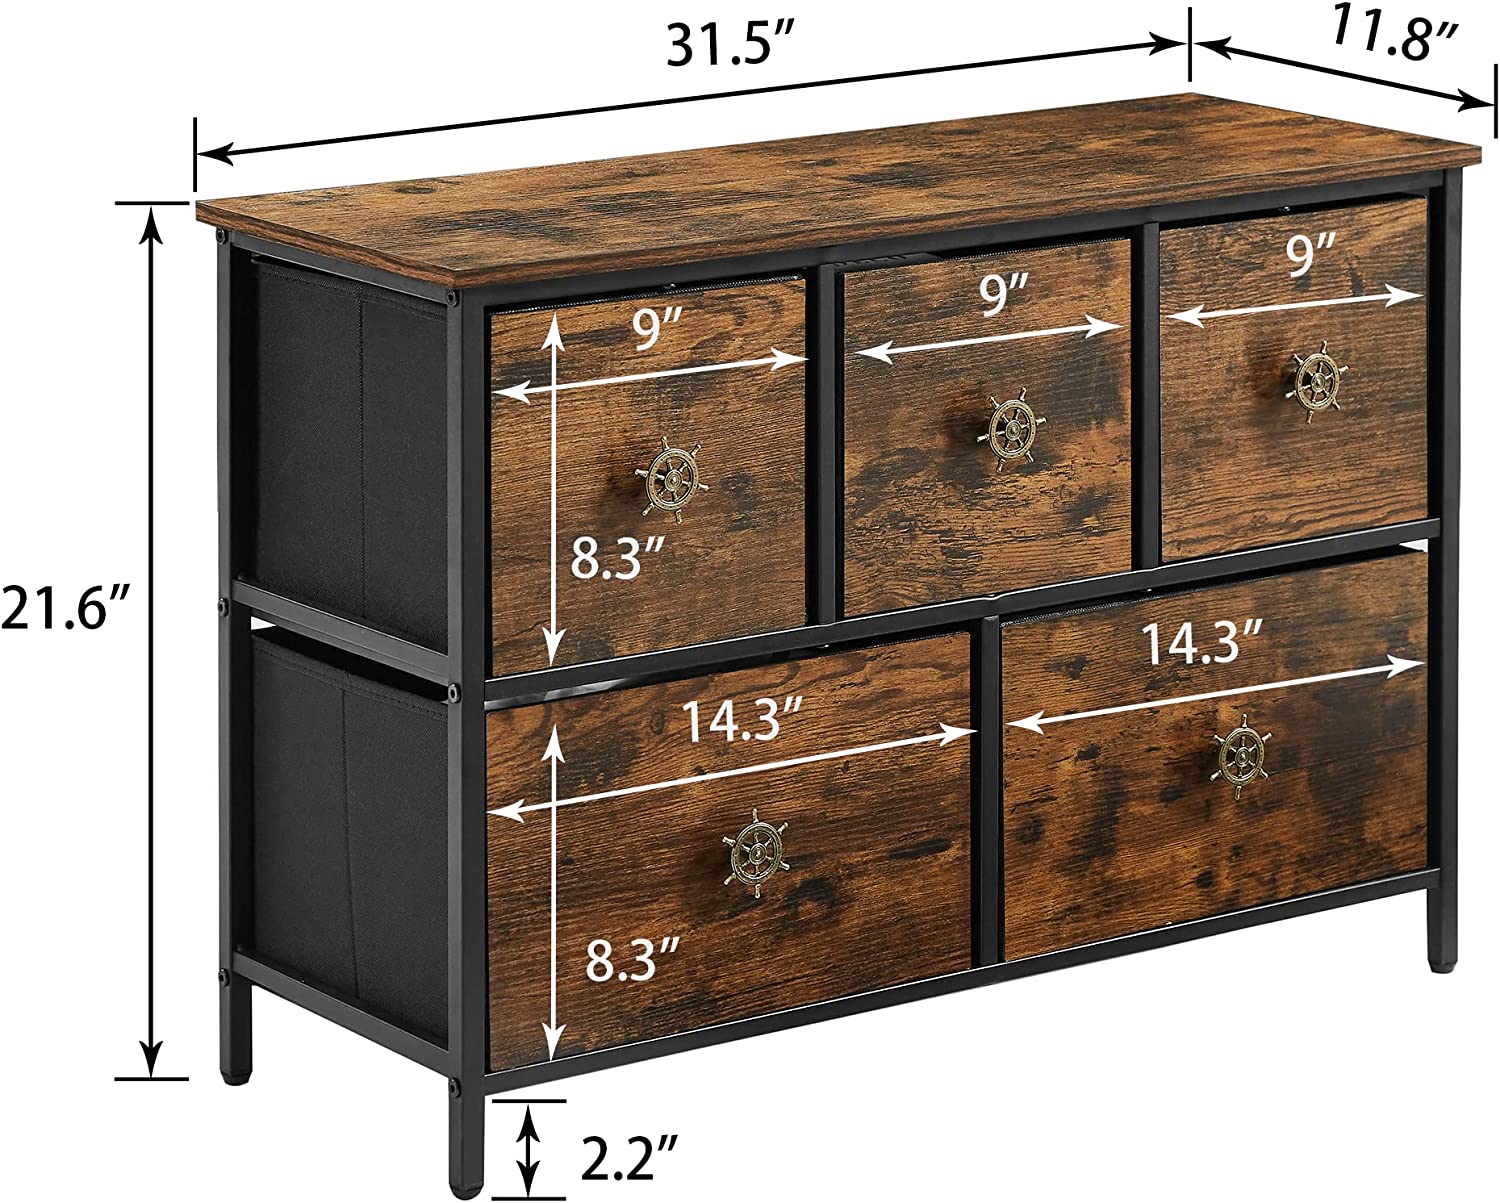 VECELO Dresser for Bedroom with 5 Fabric Drawers, Clothes Cabinet Storage Organizers and Wood Top Surface Table for Living Room, Hallway